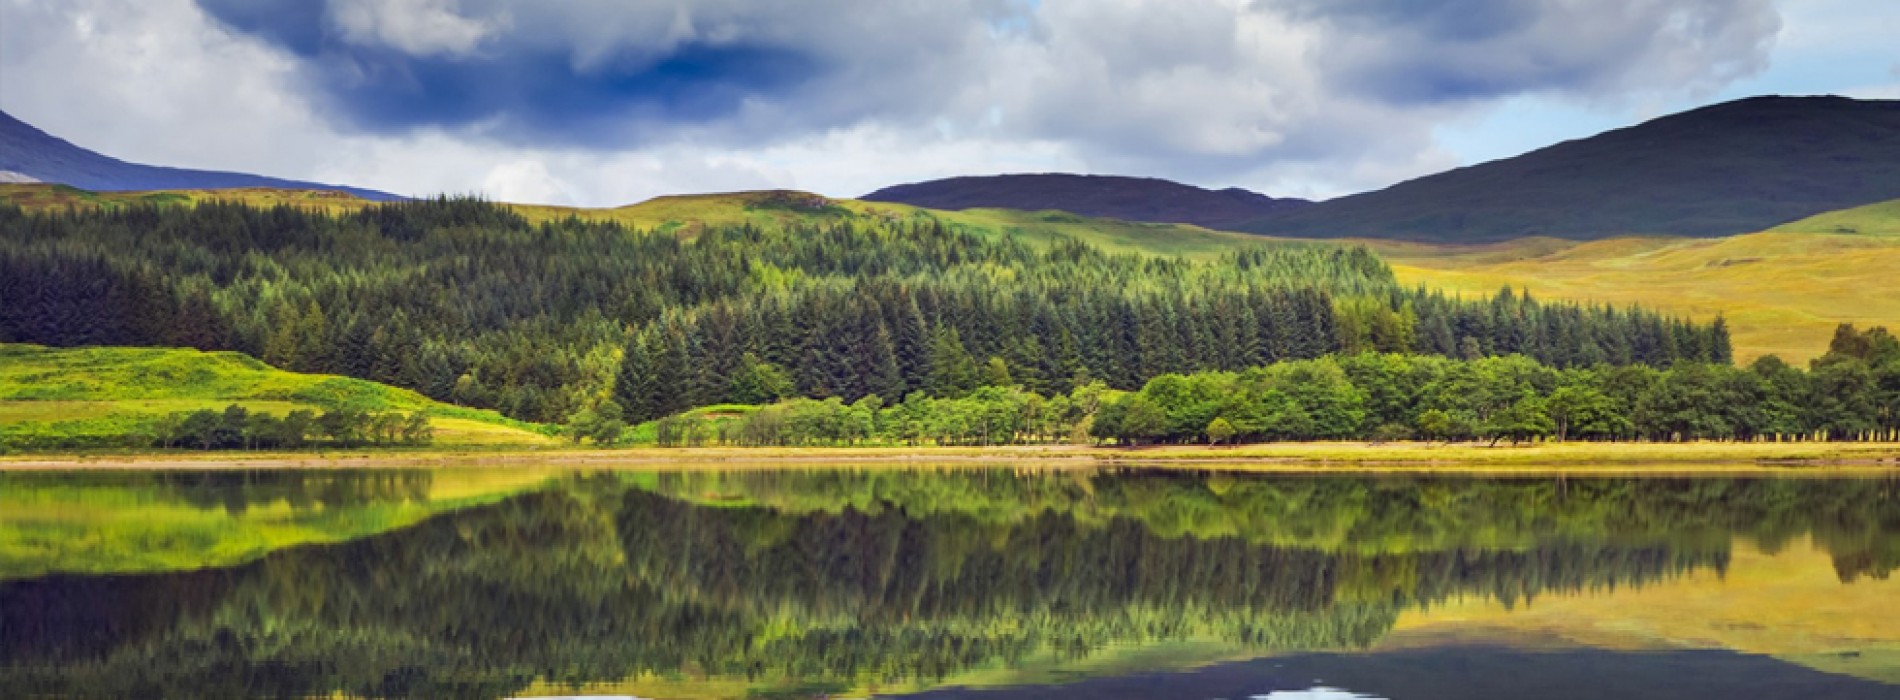 ‘Most beautiful country’ accolade highlights Scotland’s many stunning sights